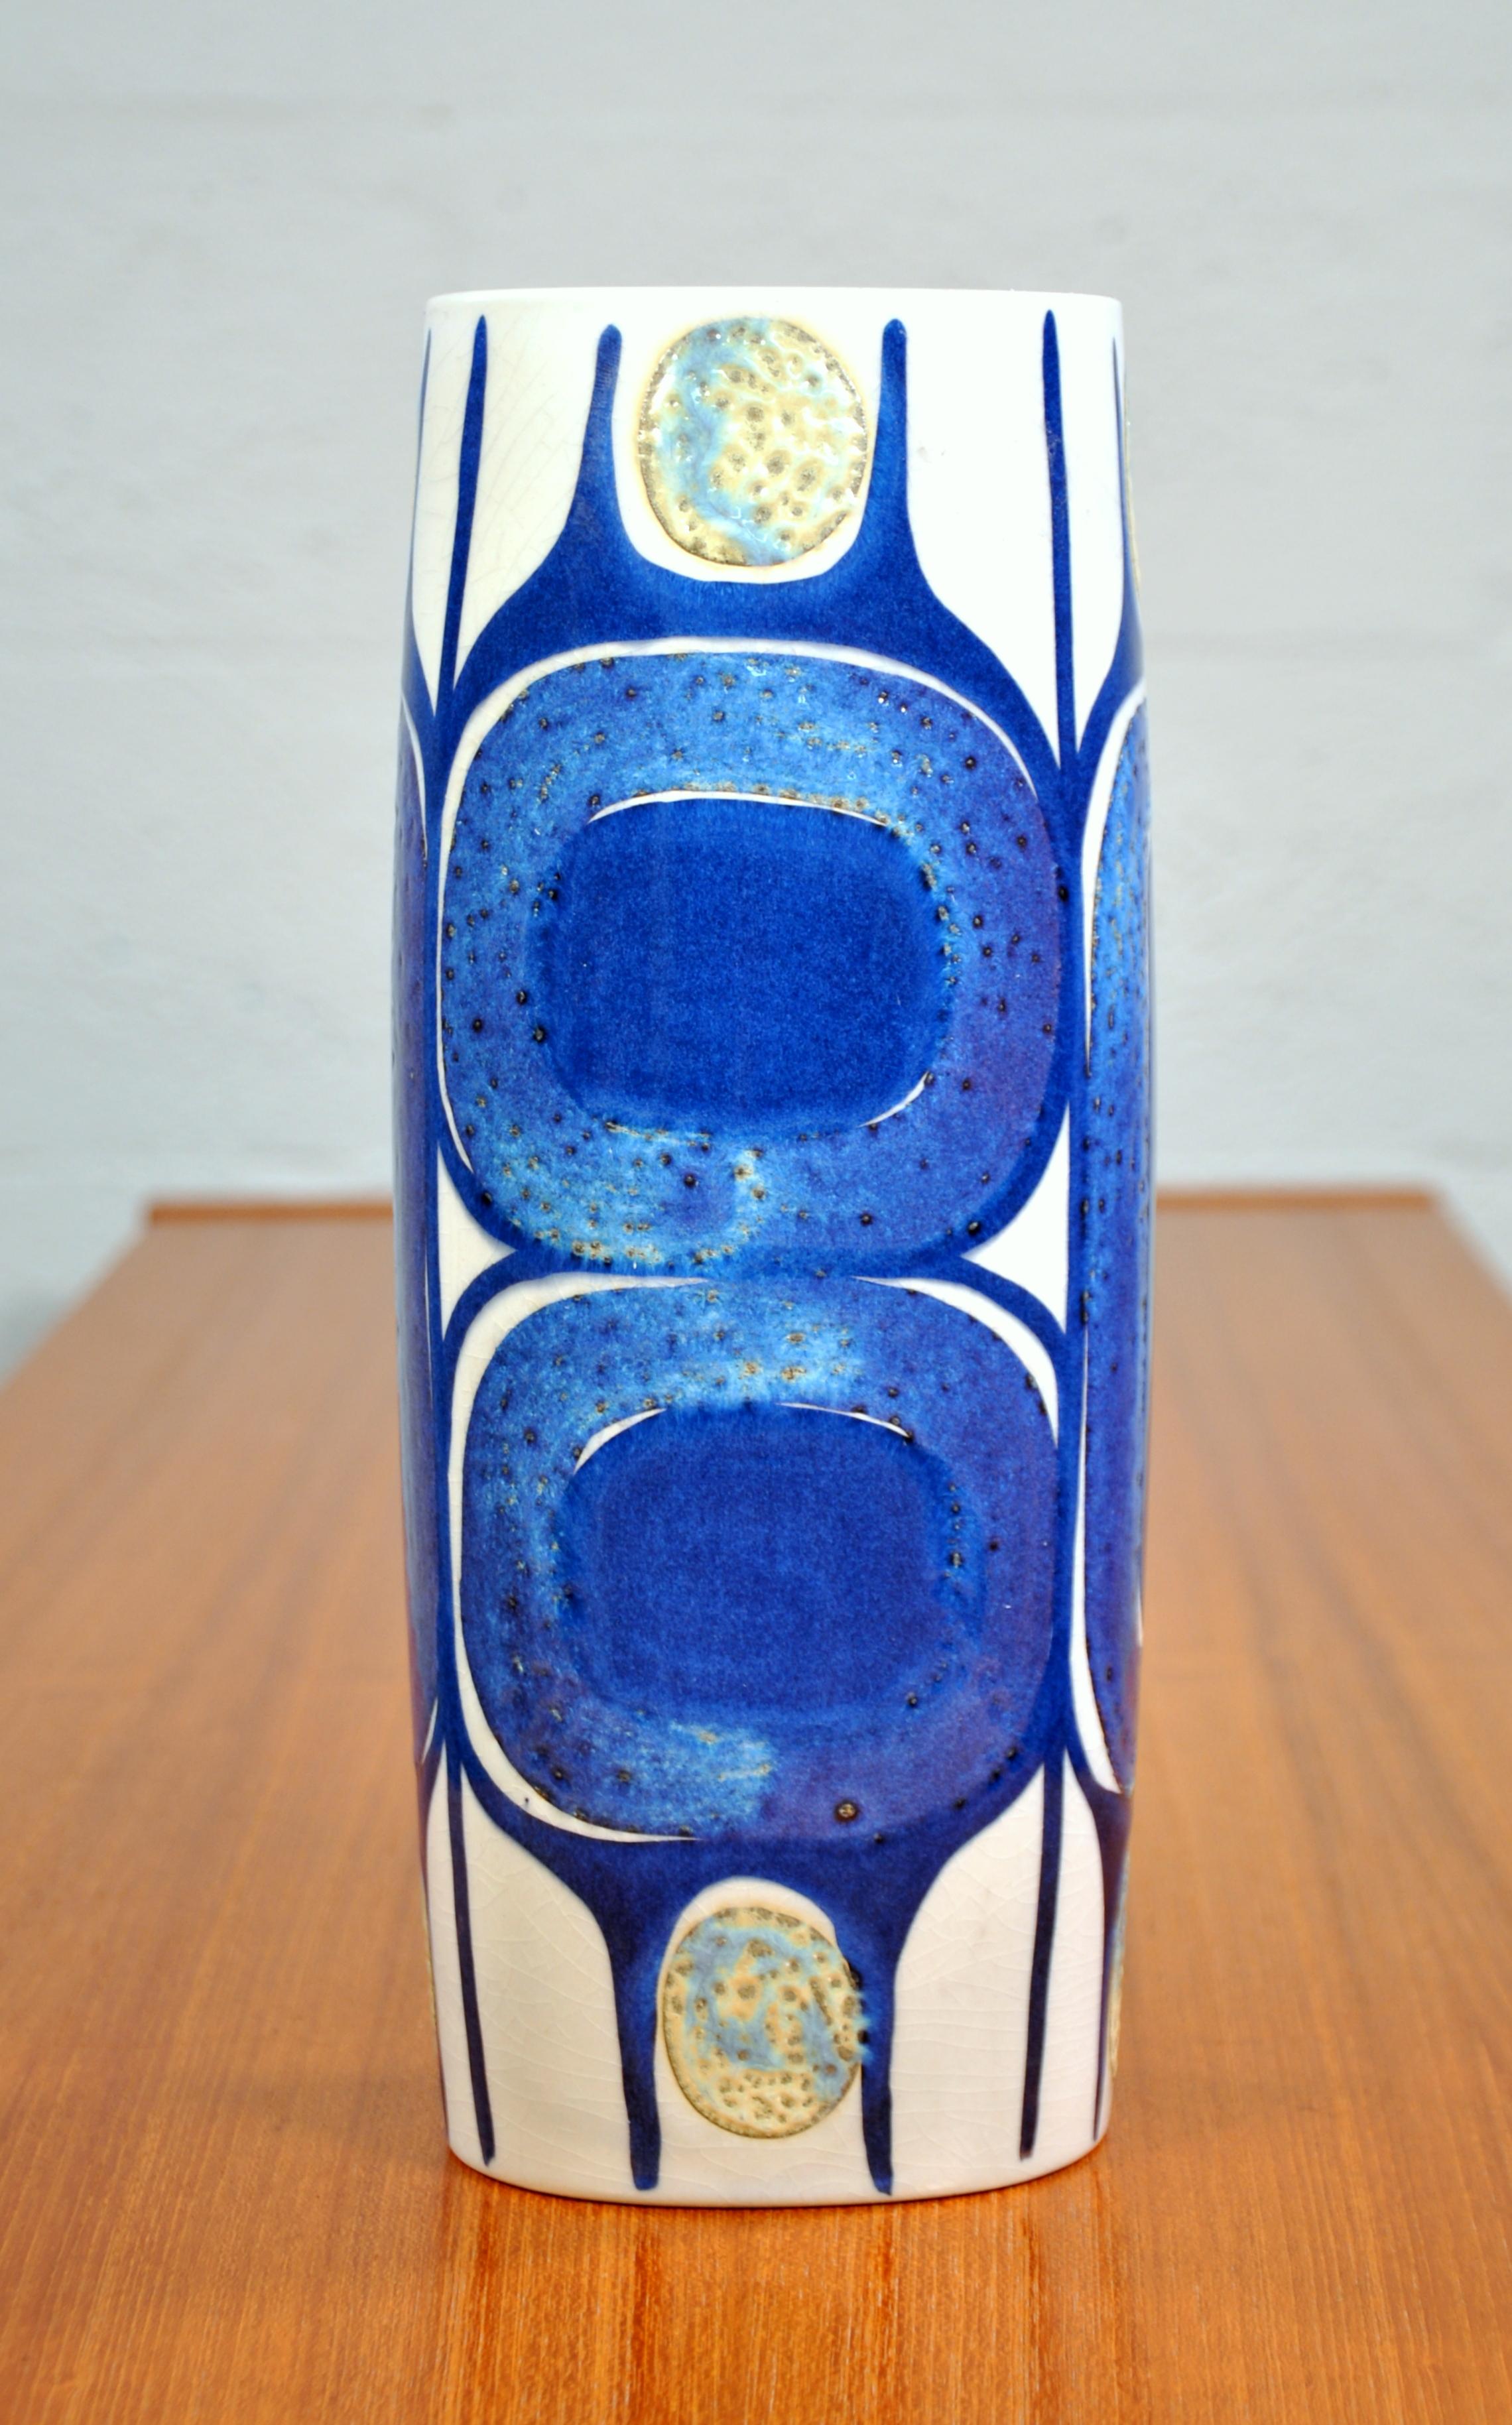 Royal Copenhagen Tenera Tall Ceramic Vase by Inge-Lise Koefoed In Excellent Condition For Sale In Miami, FL